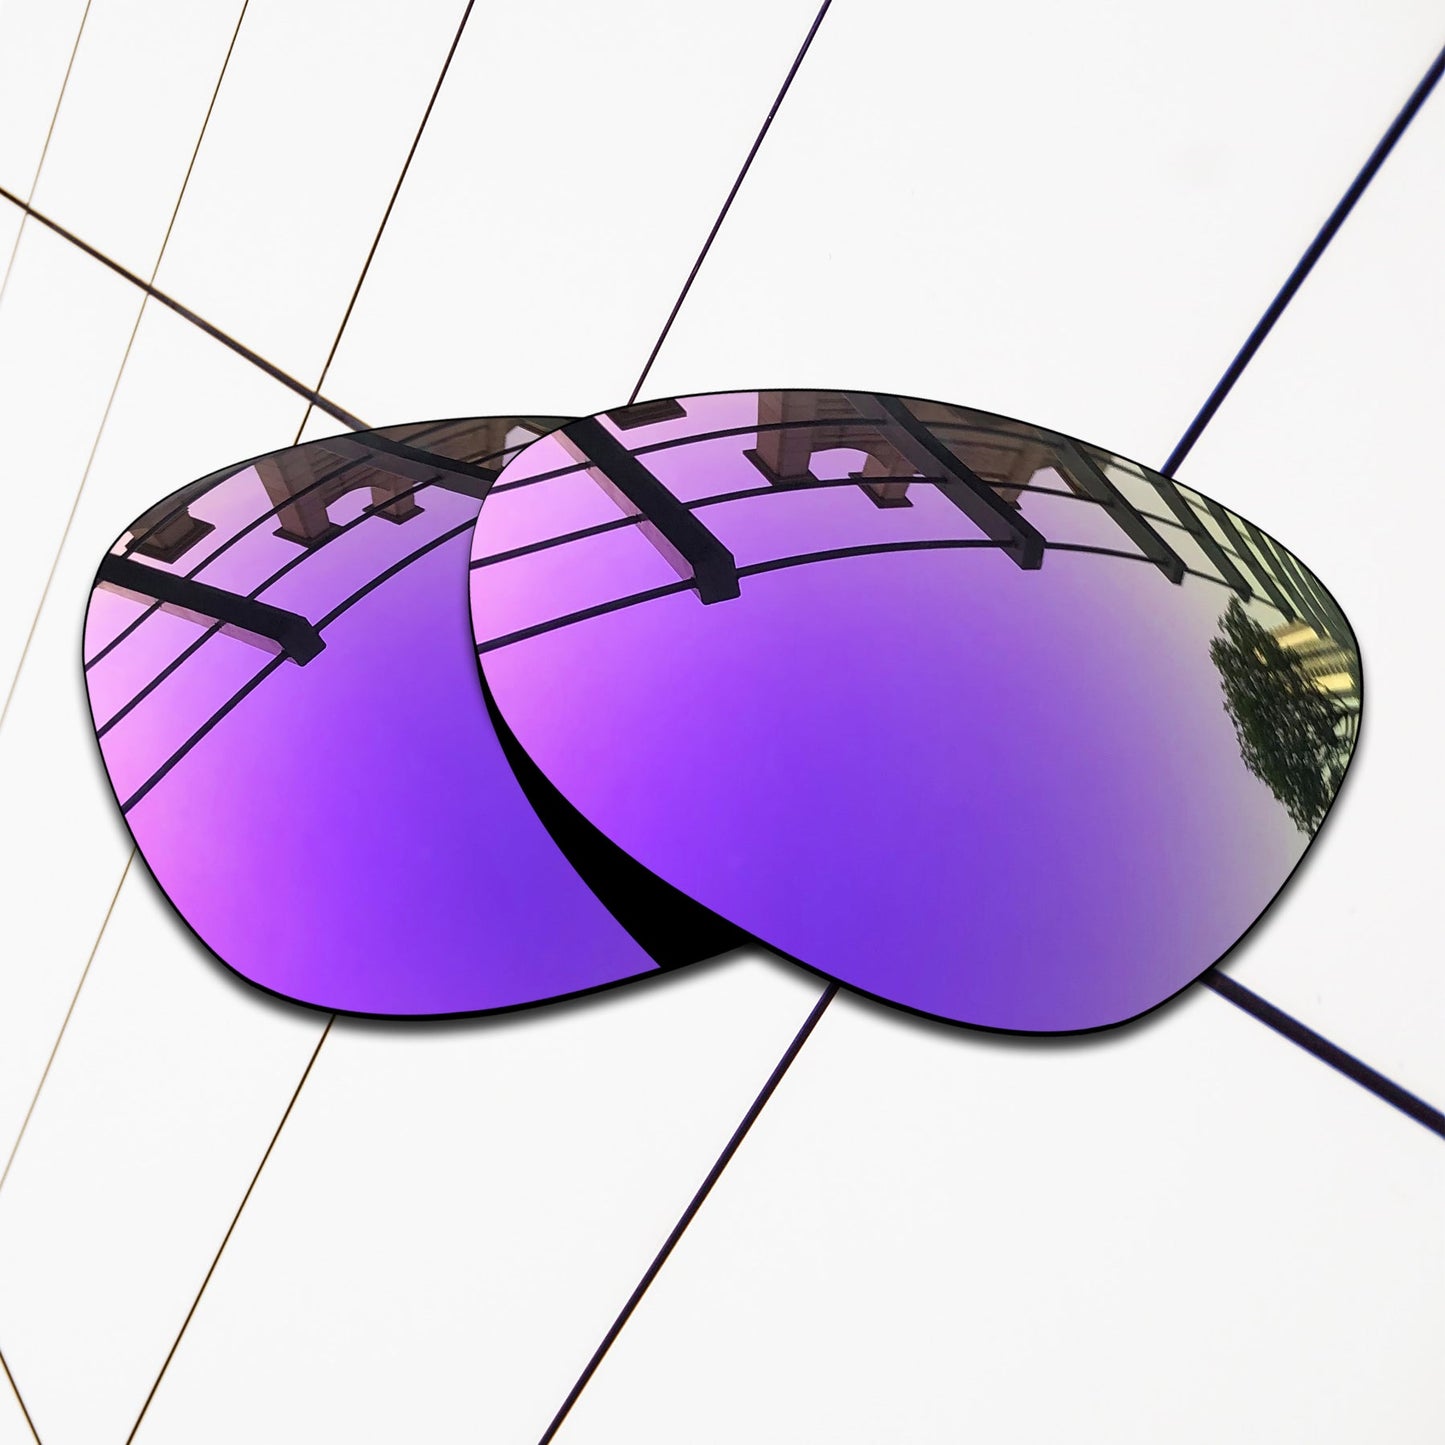 Polarized Replacement Lenses for Oakley Warden Sunglasses